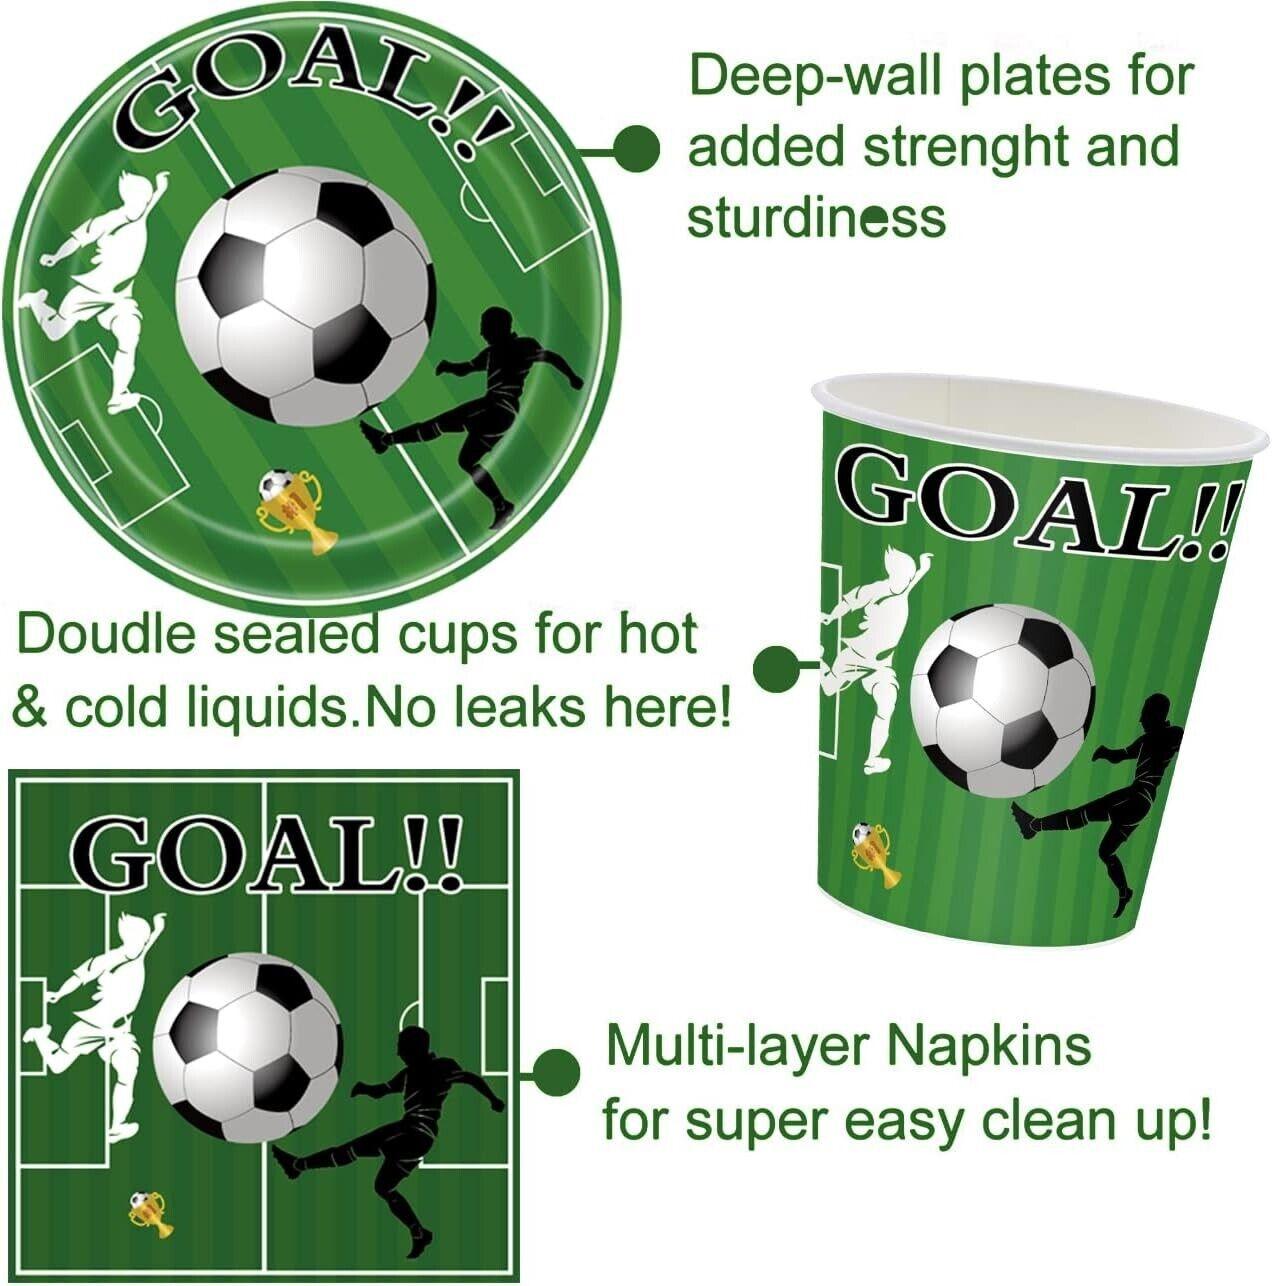 Birthday Decorations Serves 10 Guests Football Party Supplies - Massive Discounts